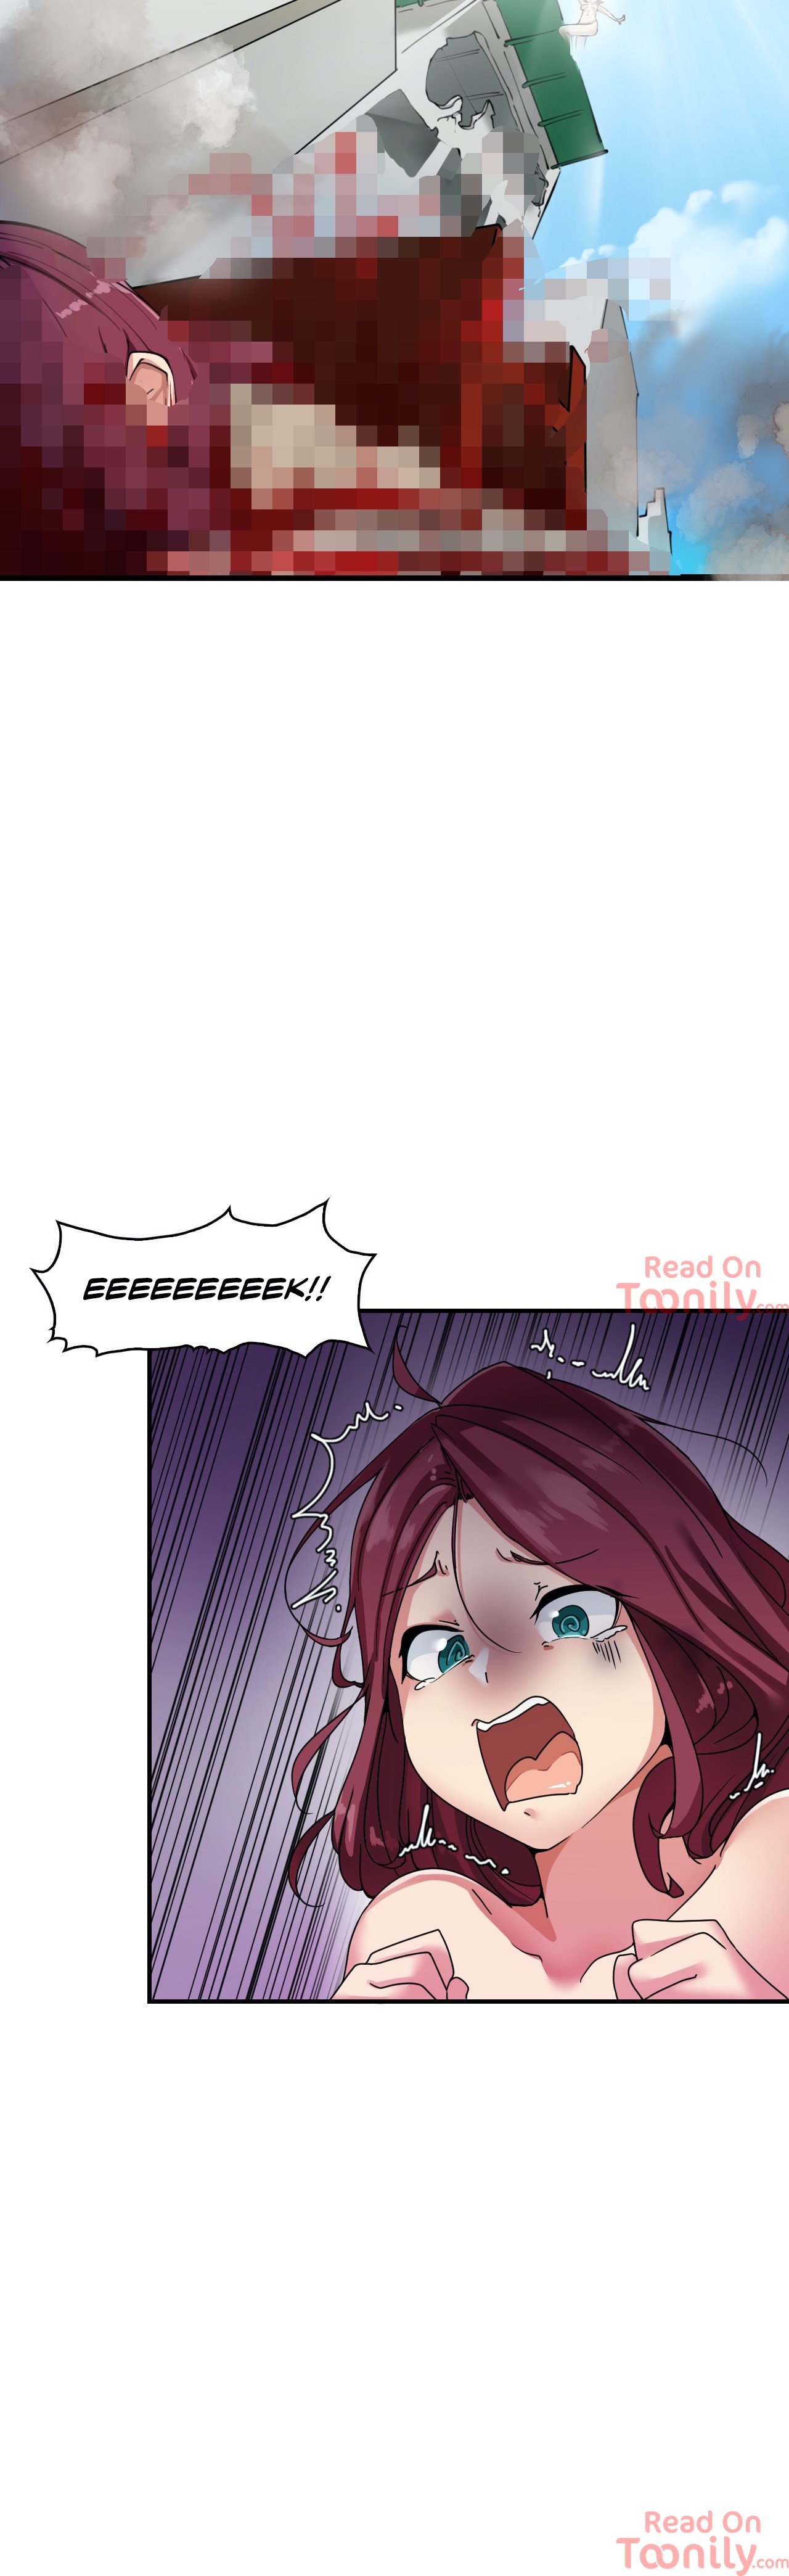 The Girl Hiding in the Wall - Chapter 1 Page 18